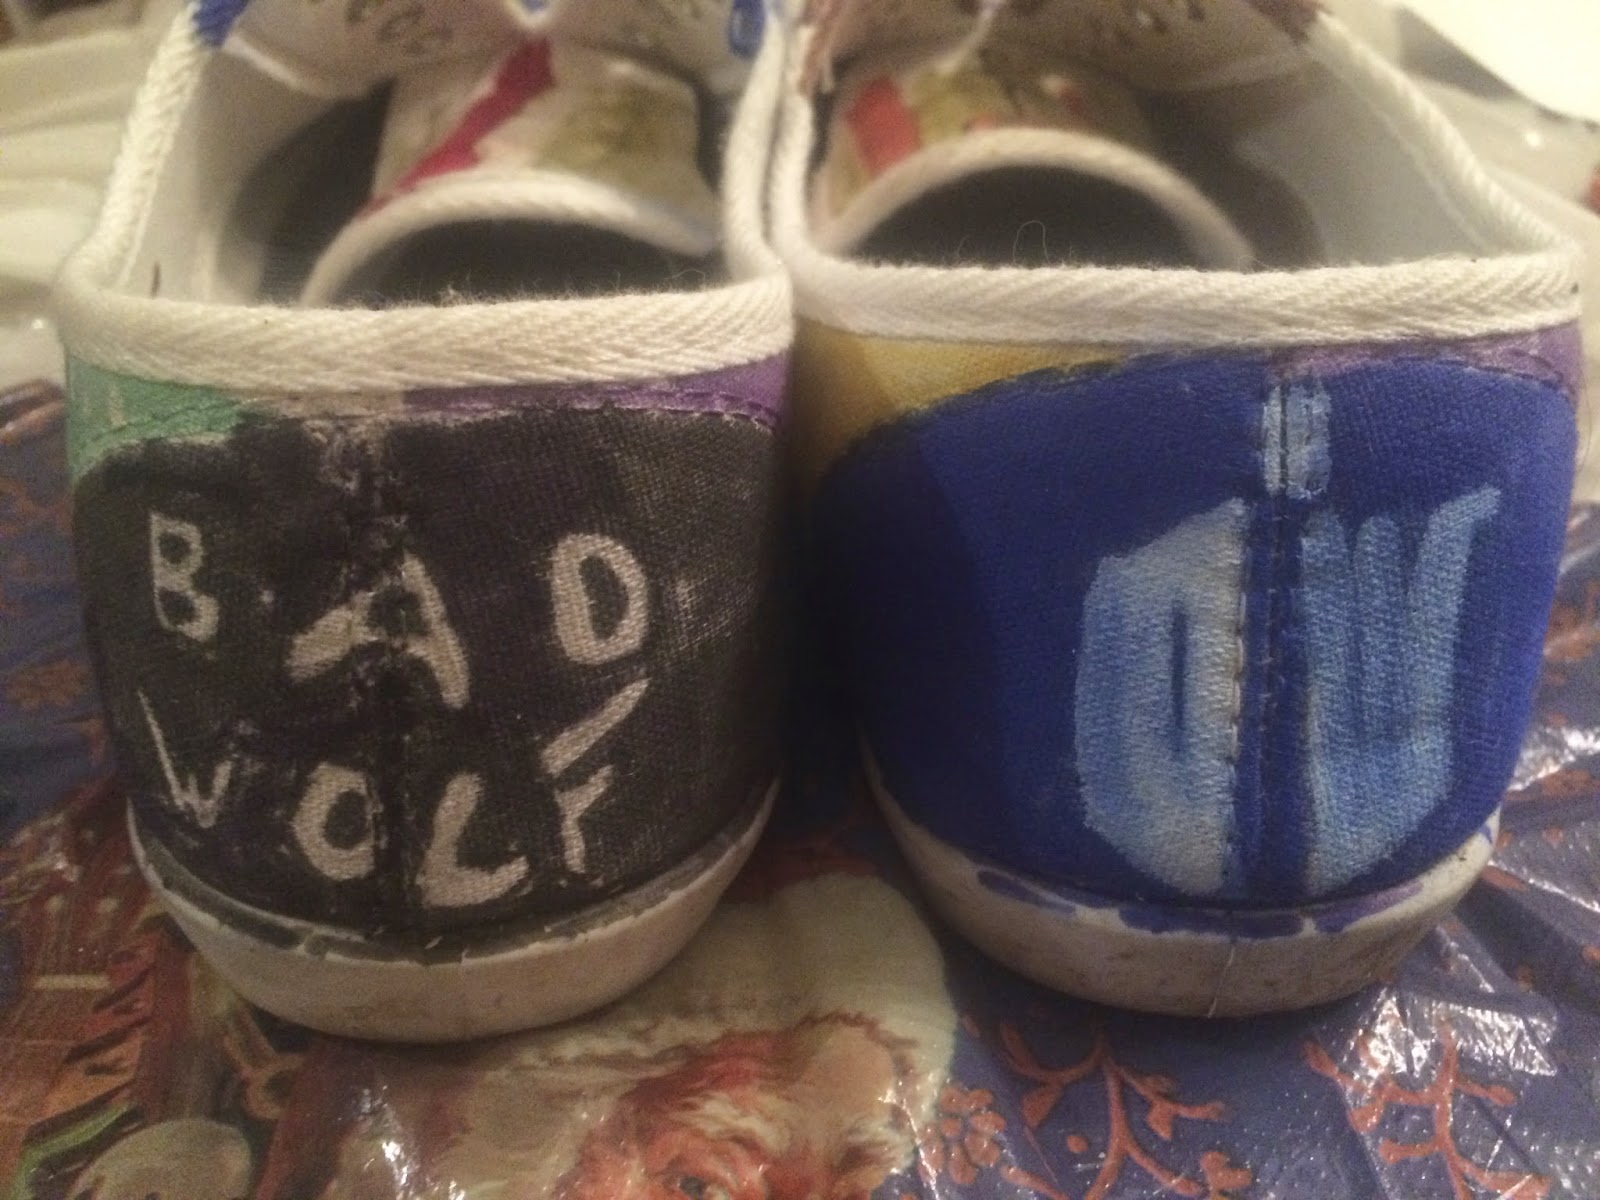 RANTS FROM MOMMYLAND: Nerd Crafts: Sneakers